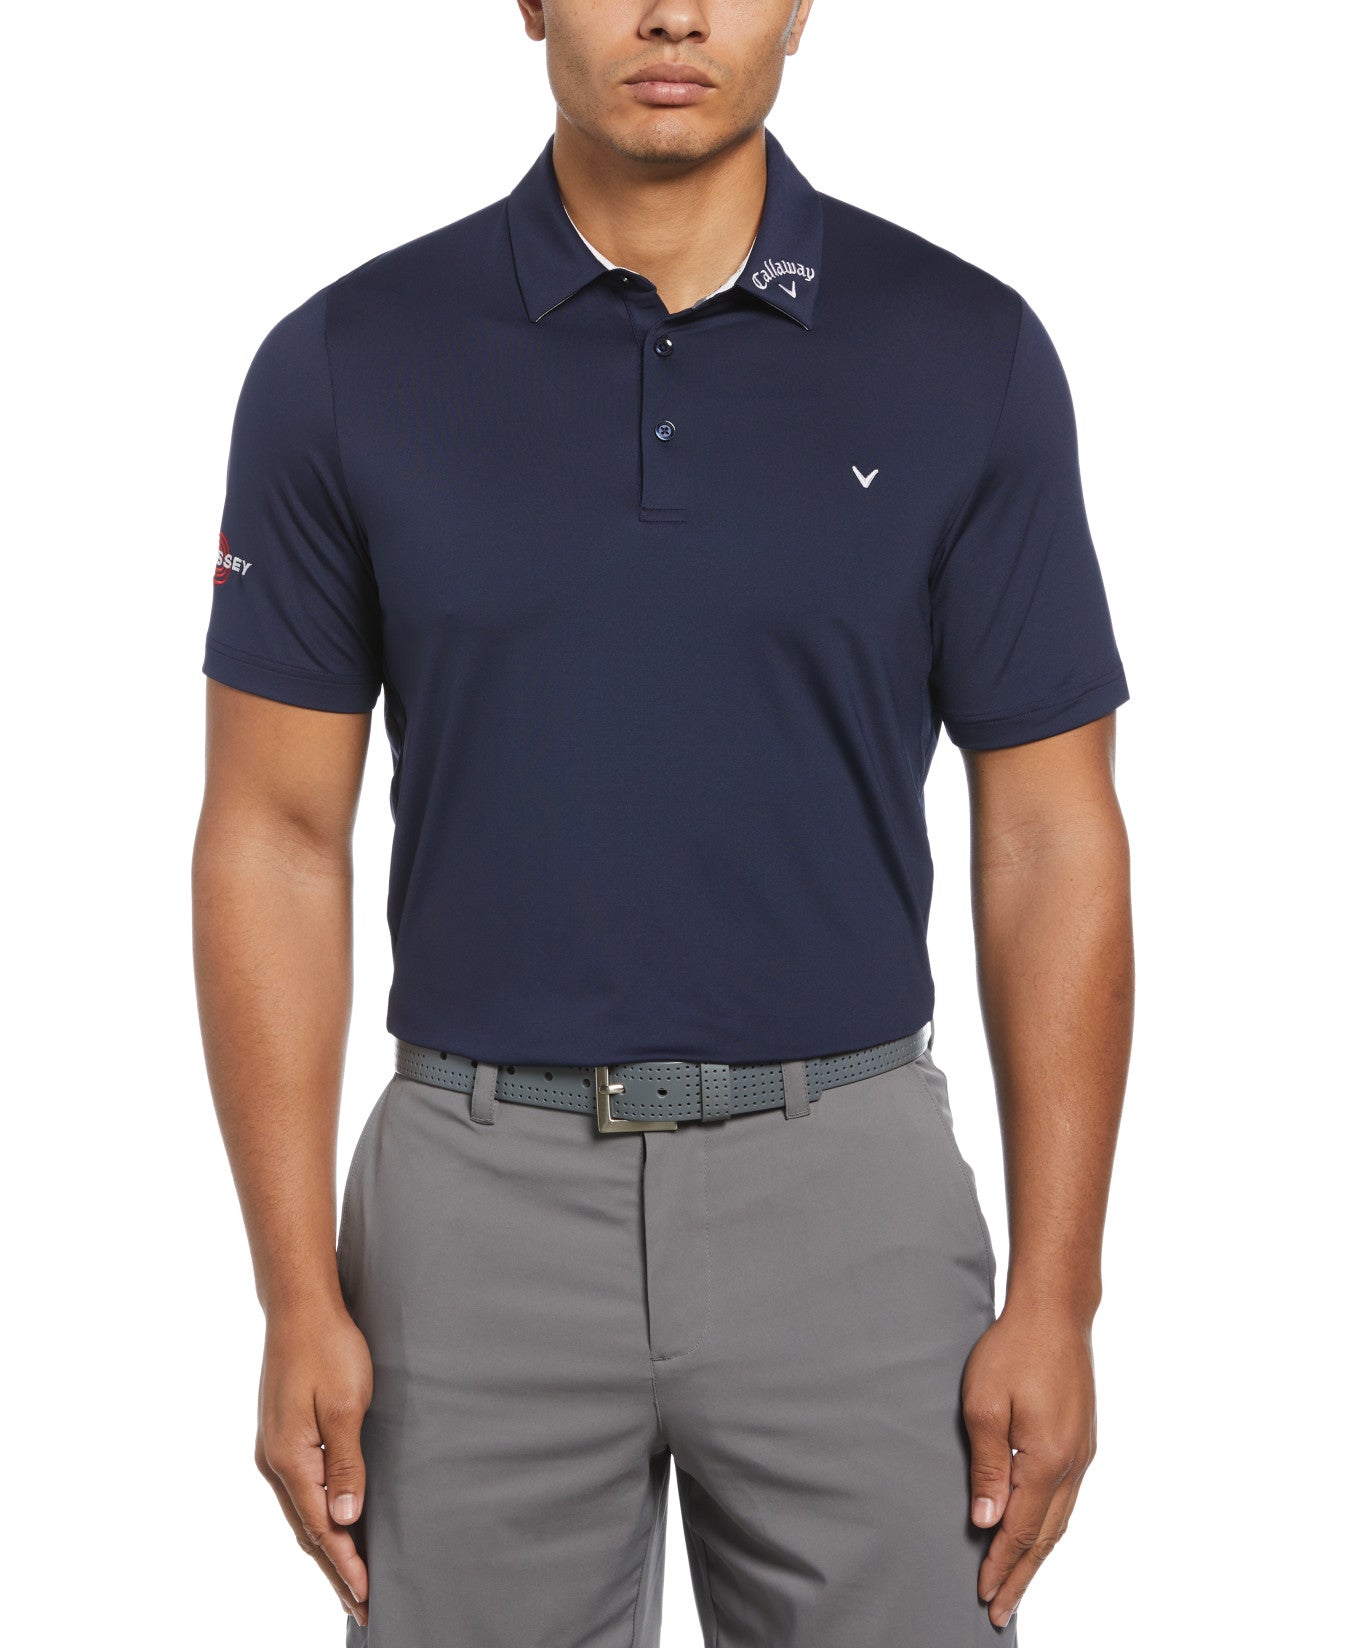 View Short Sleeve Odyssey Block Polo Shirt In Peacoat information